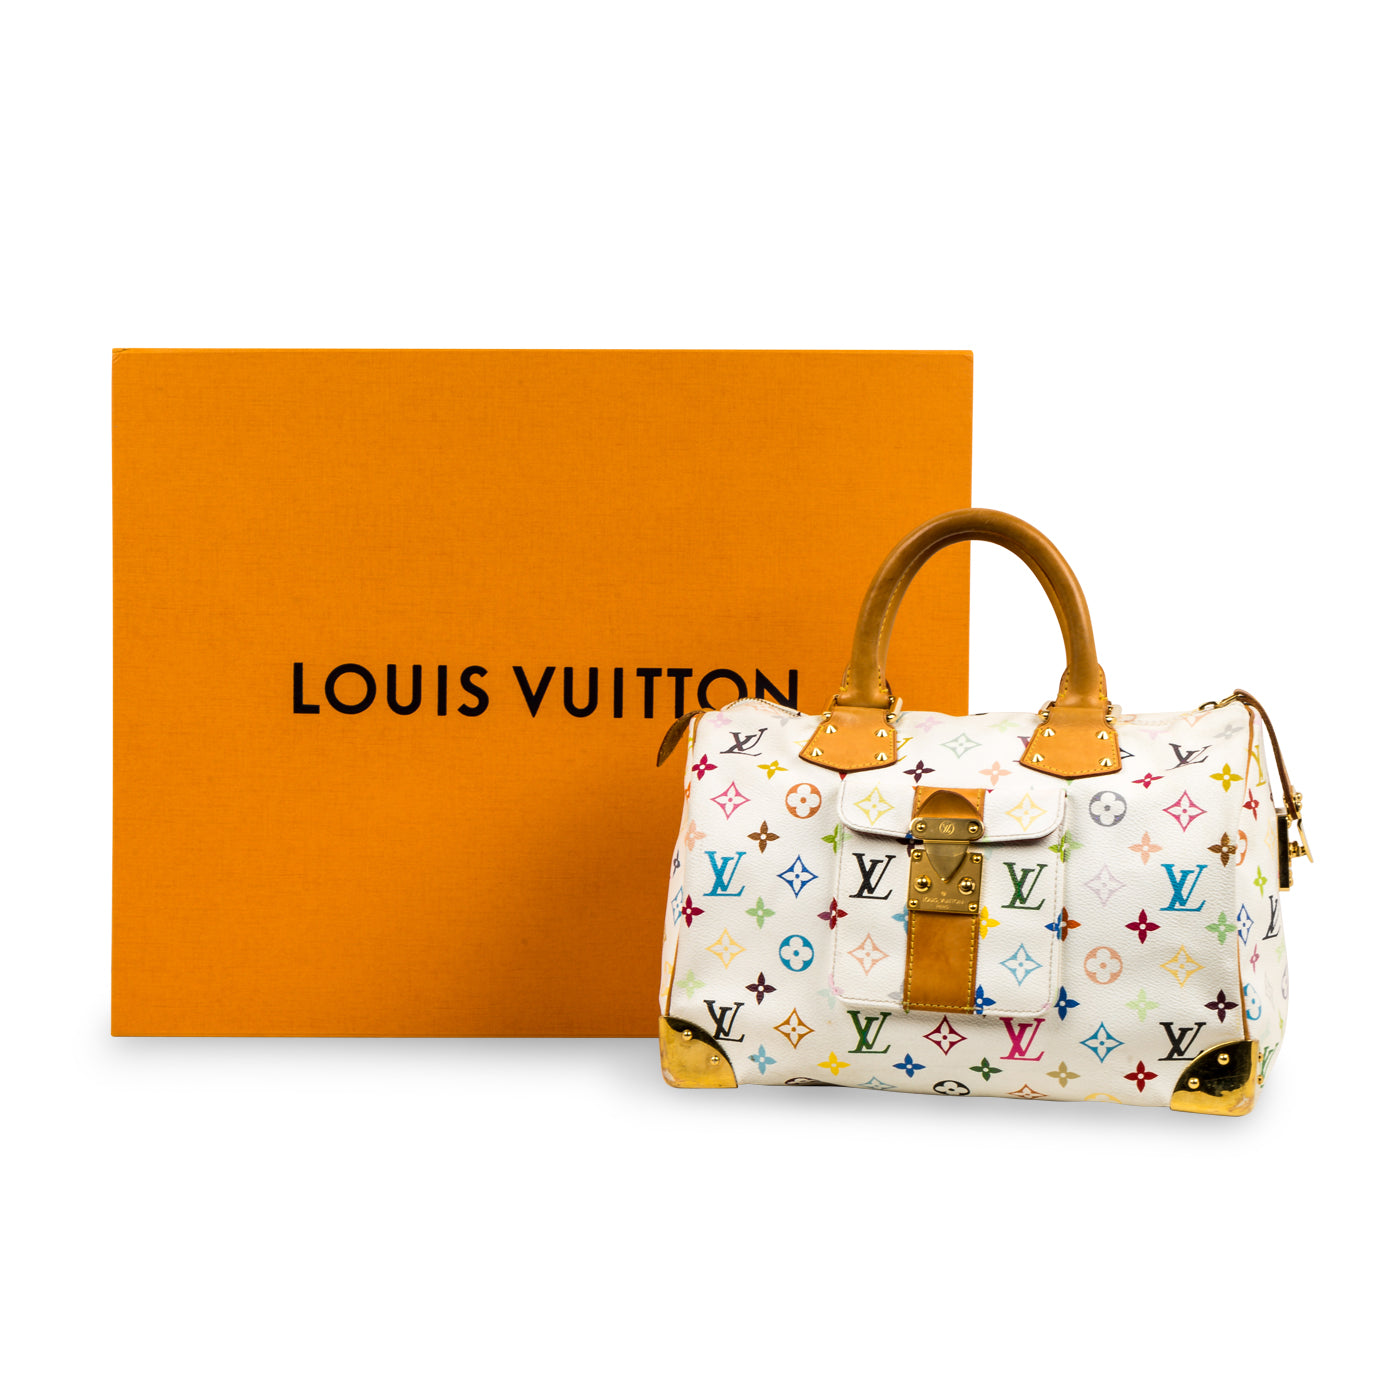 Louis Vuitton Multicolor Speedy; A Love Story Here to Stay